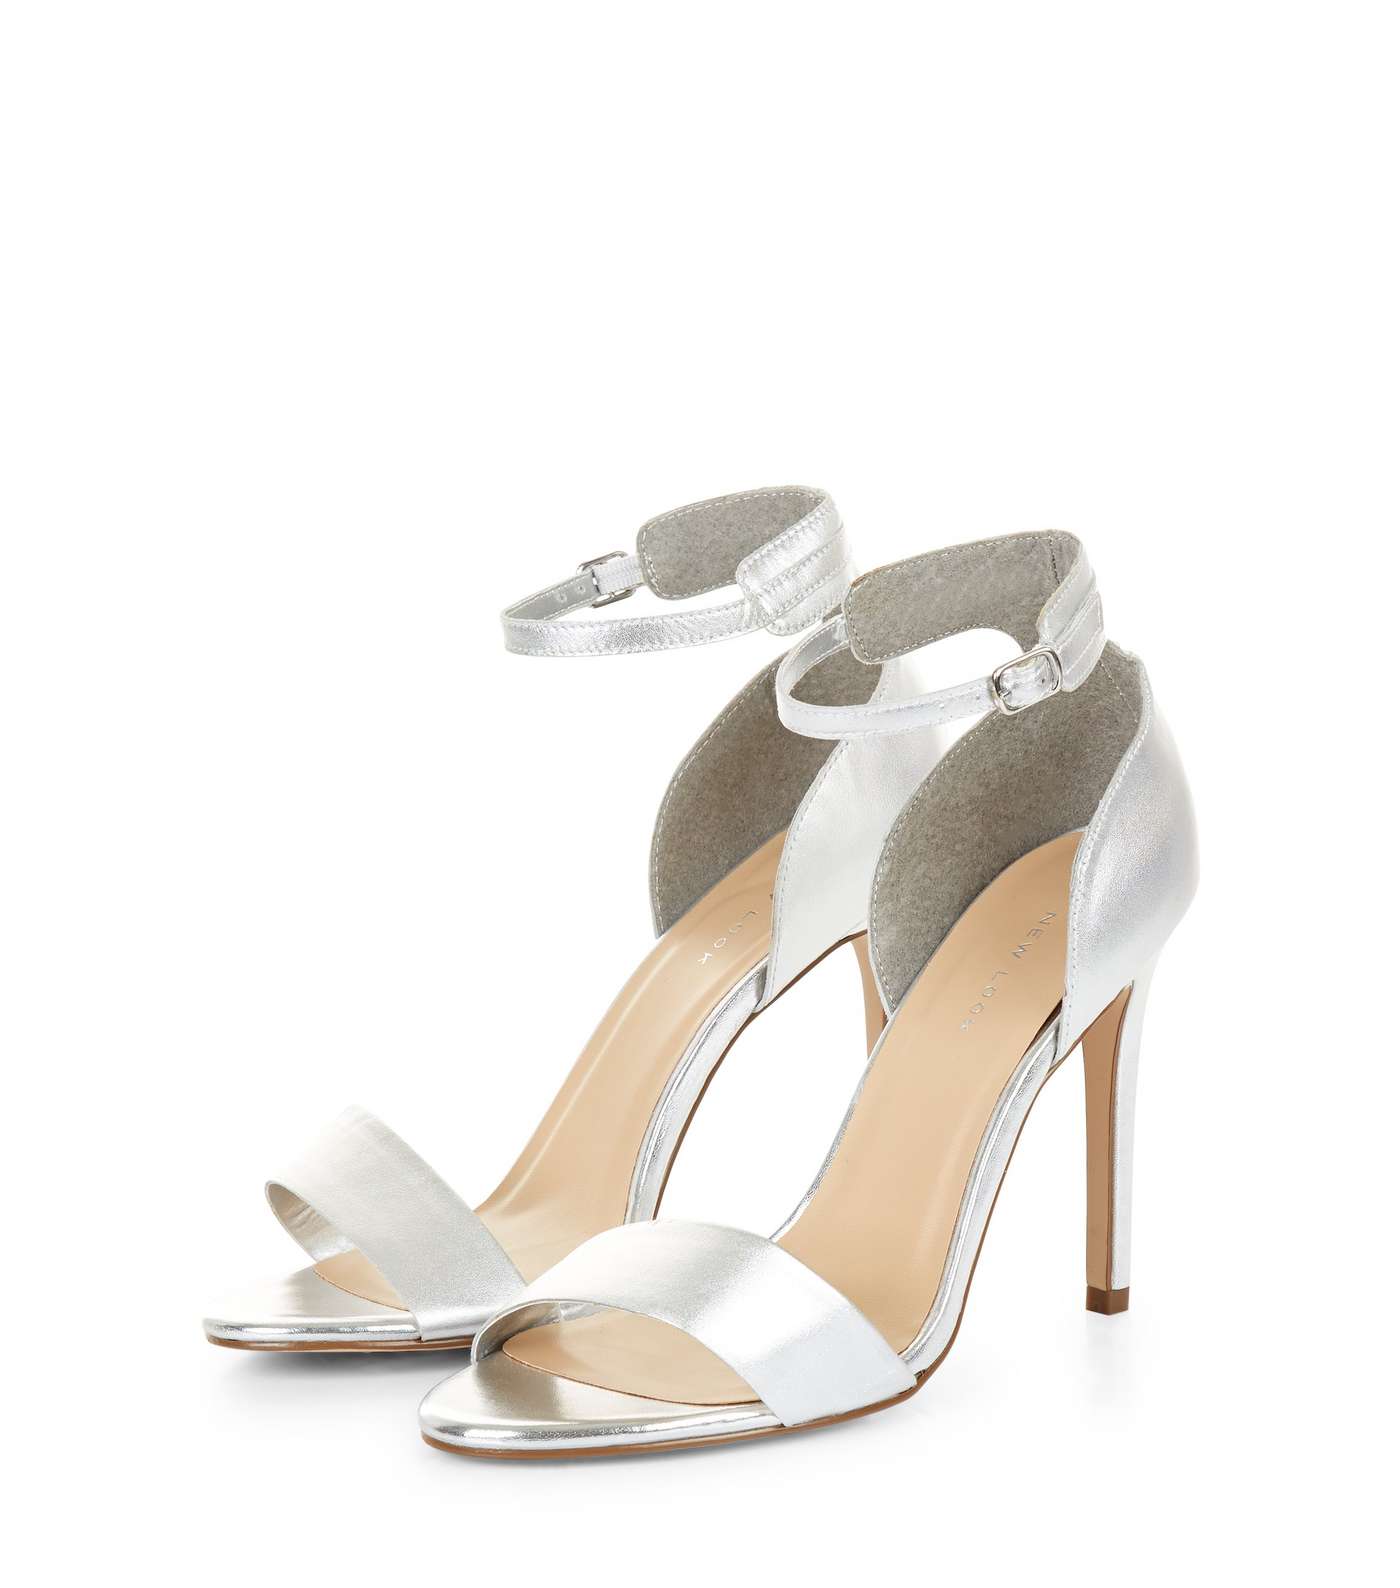 Silver Metallic Leather Ankle Strap Heels Image 3